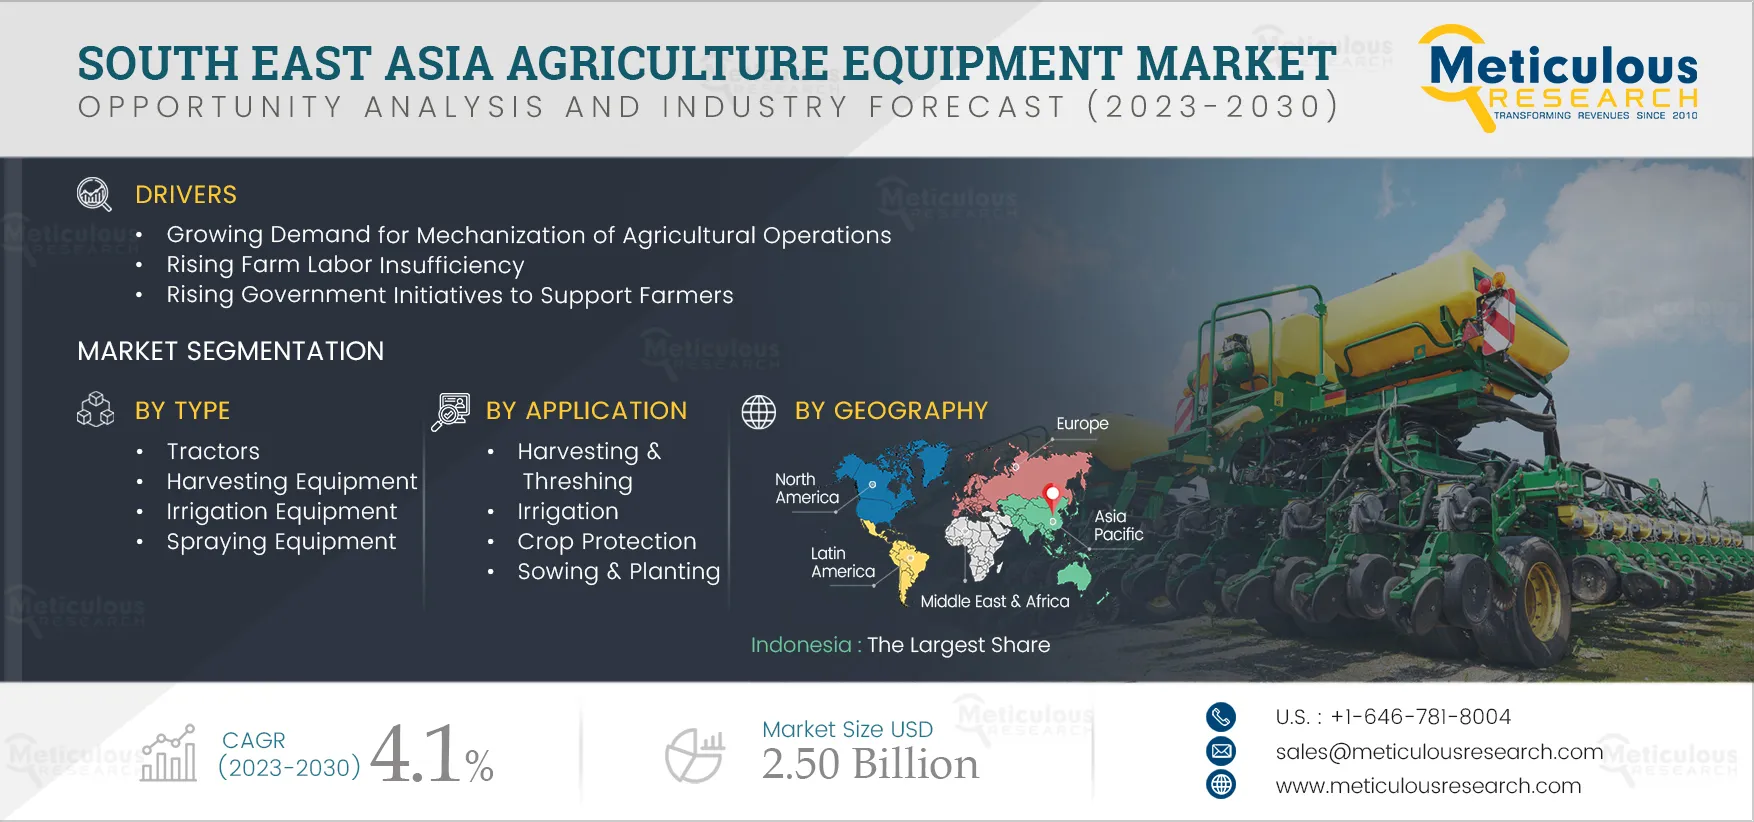 South East Asia Agriculture Equipment Market 